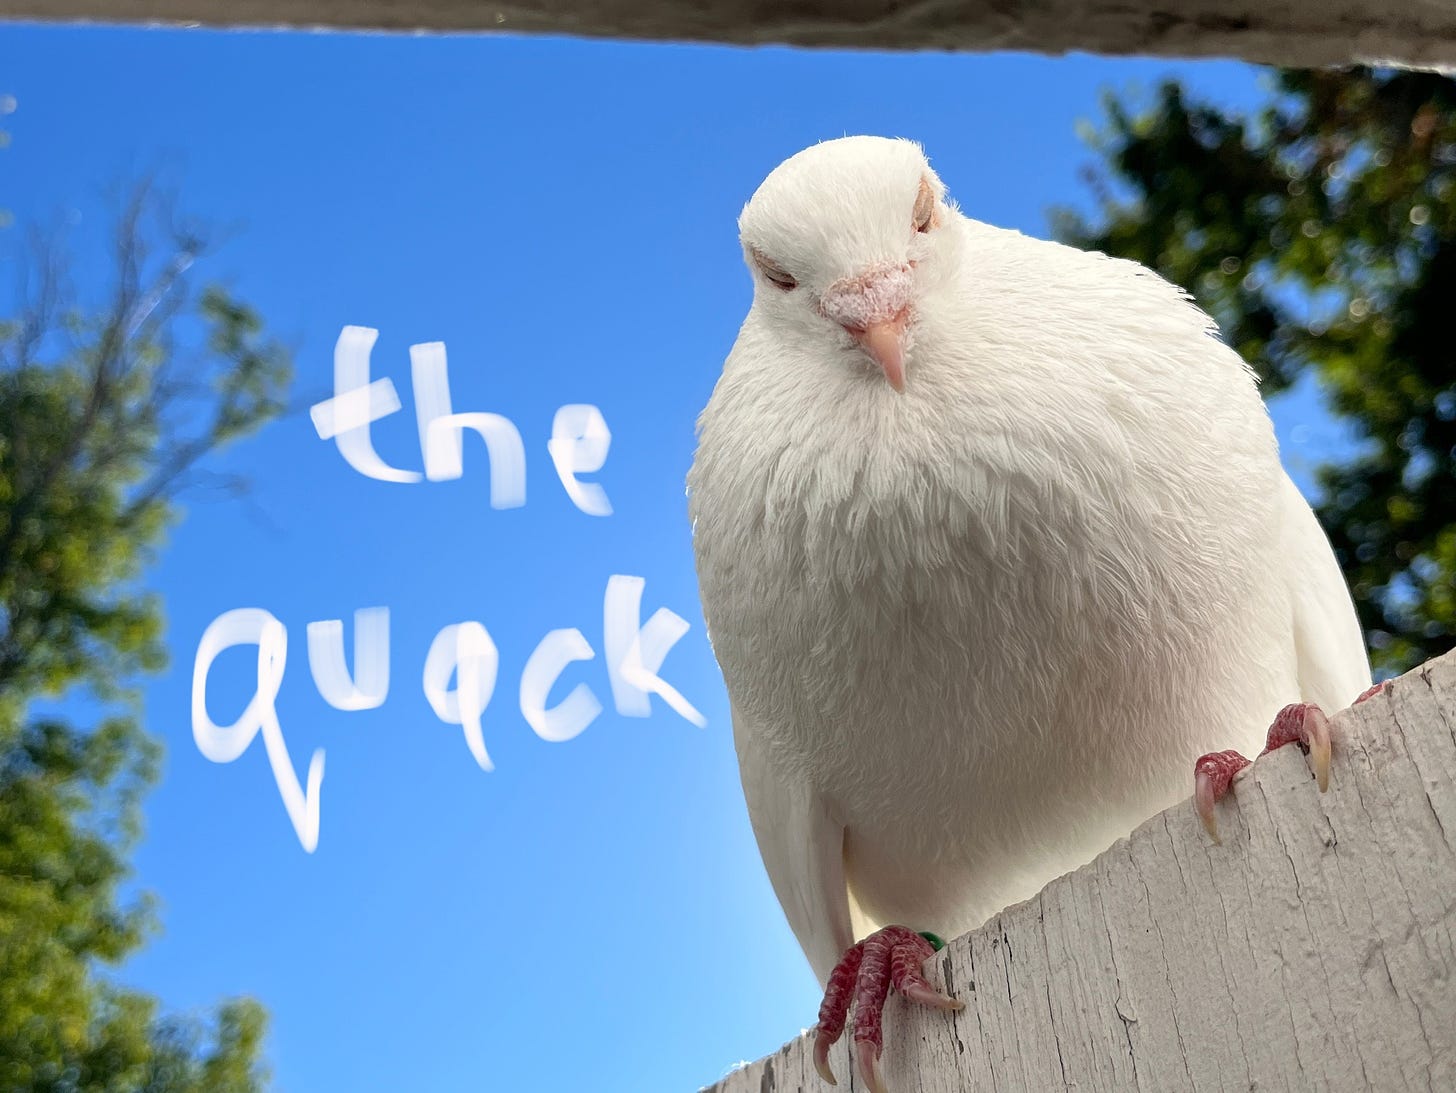 A white pigeon glares down from a perch on top of a painted door. the words "the quacK" are in whispy letter on the sky